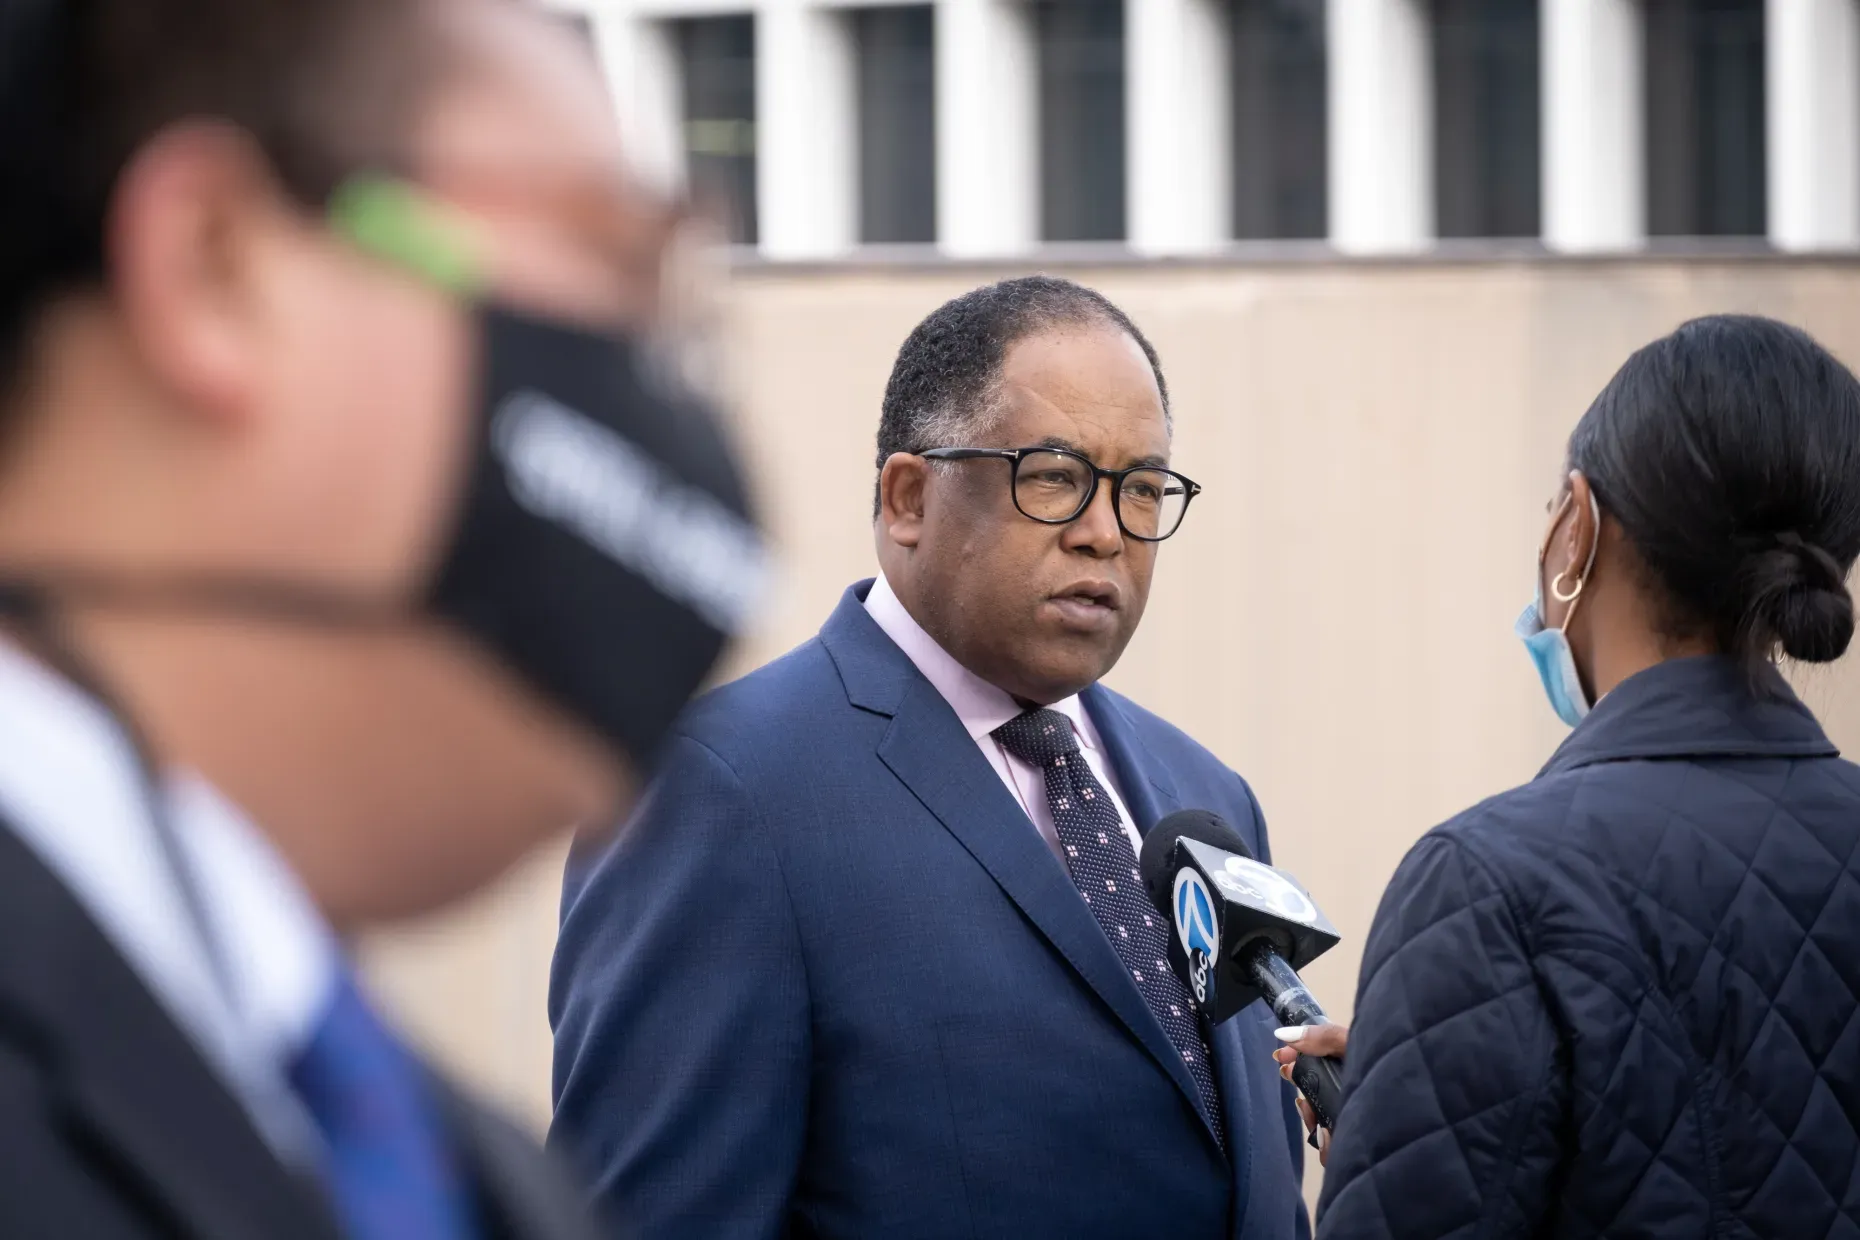 LA Daily News: Lawsuit aims to block appointment of Herb Wesson to LA City Council, reinstate Mark Ridley-Thomas